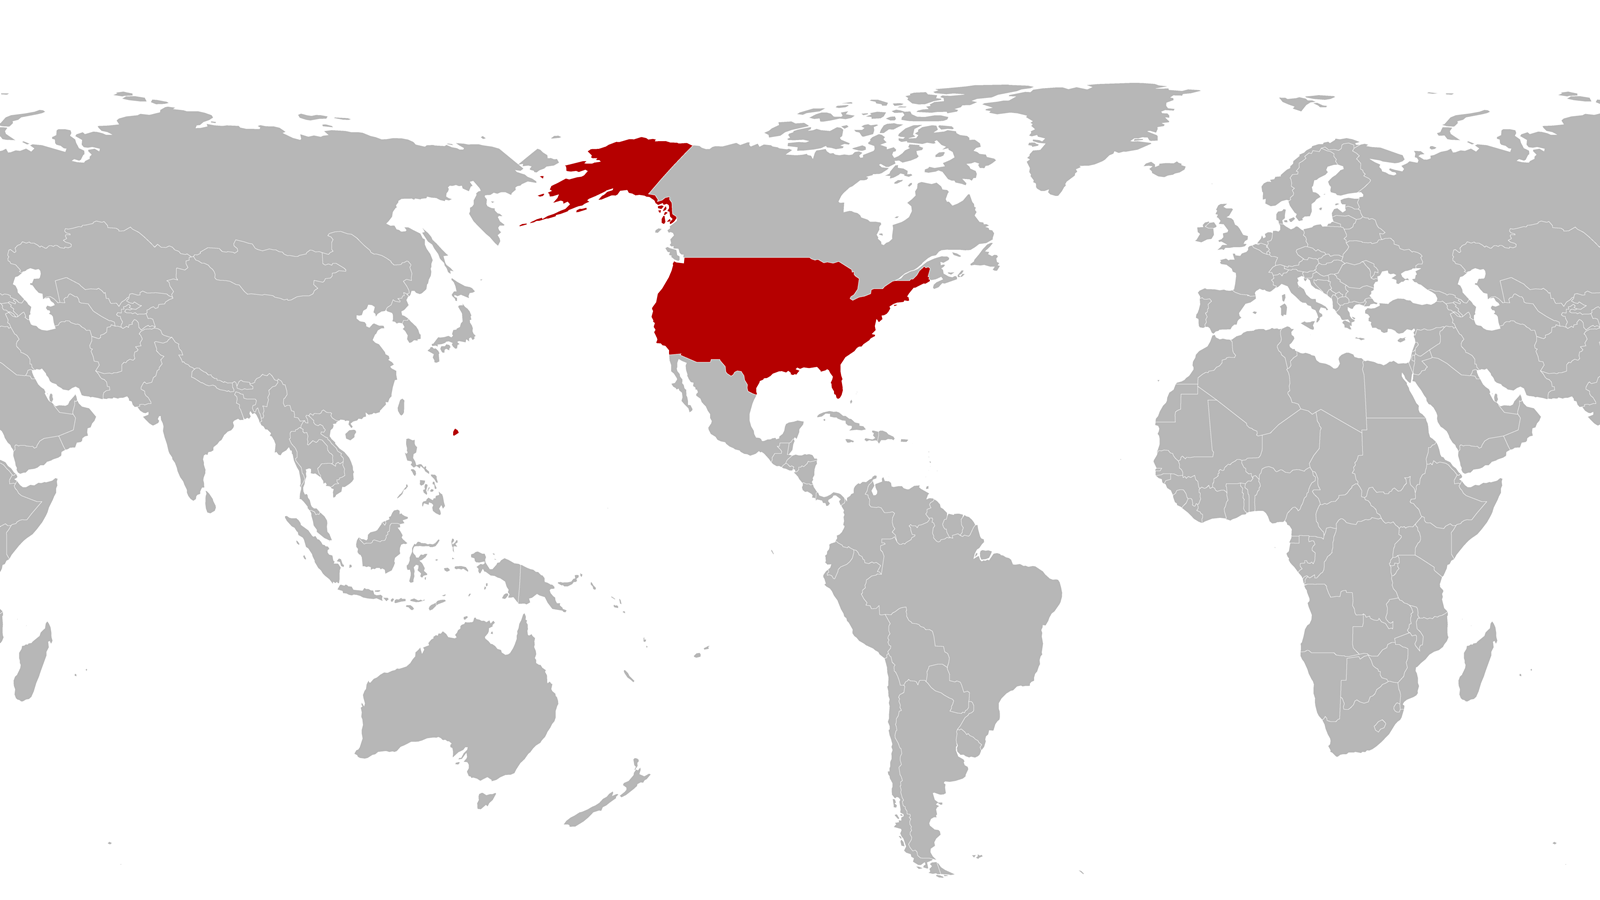 World map with centred USA highlighted